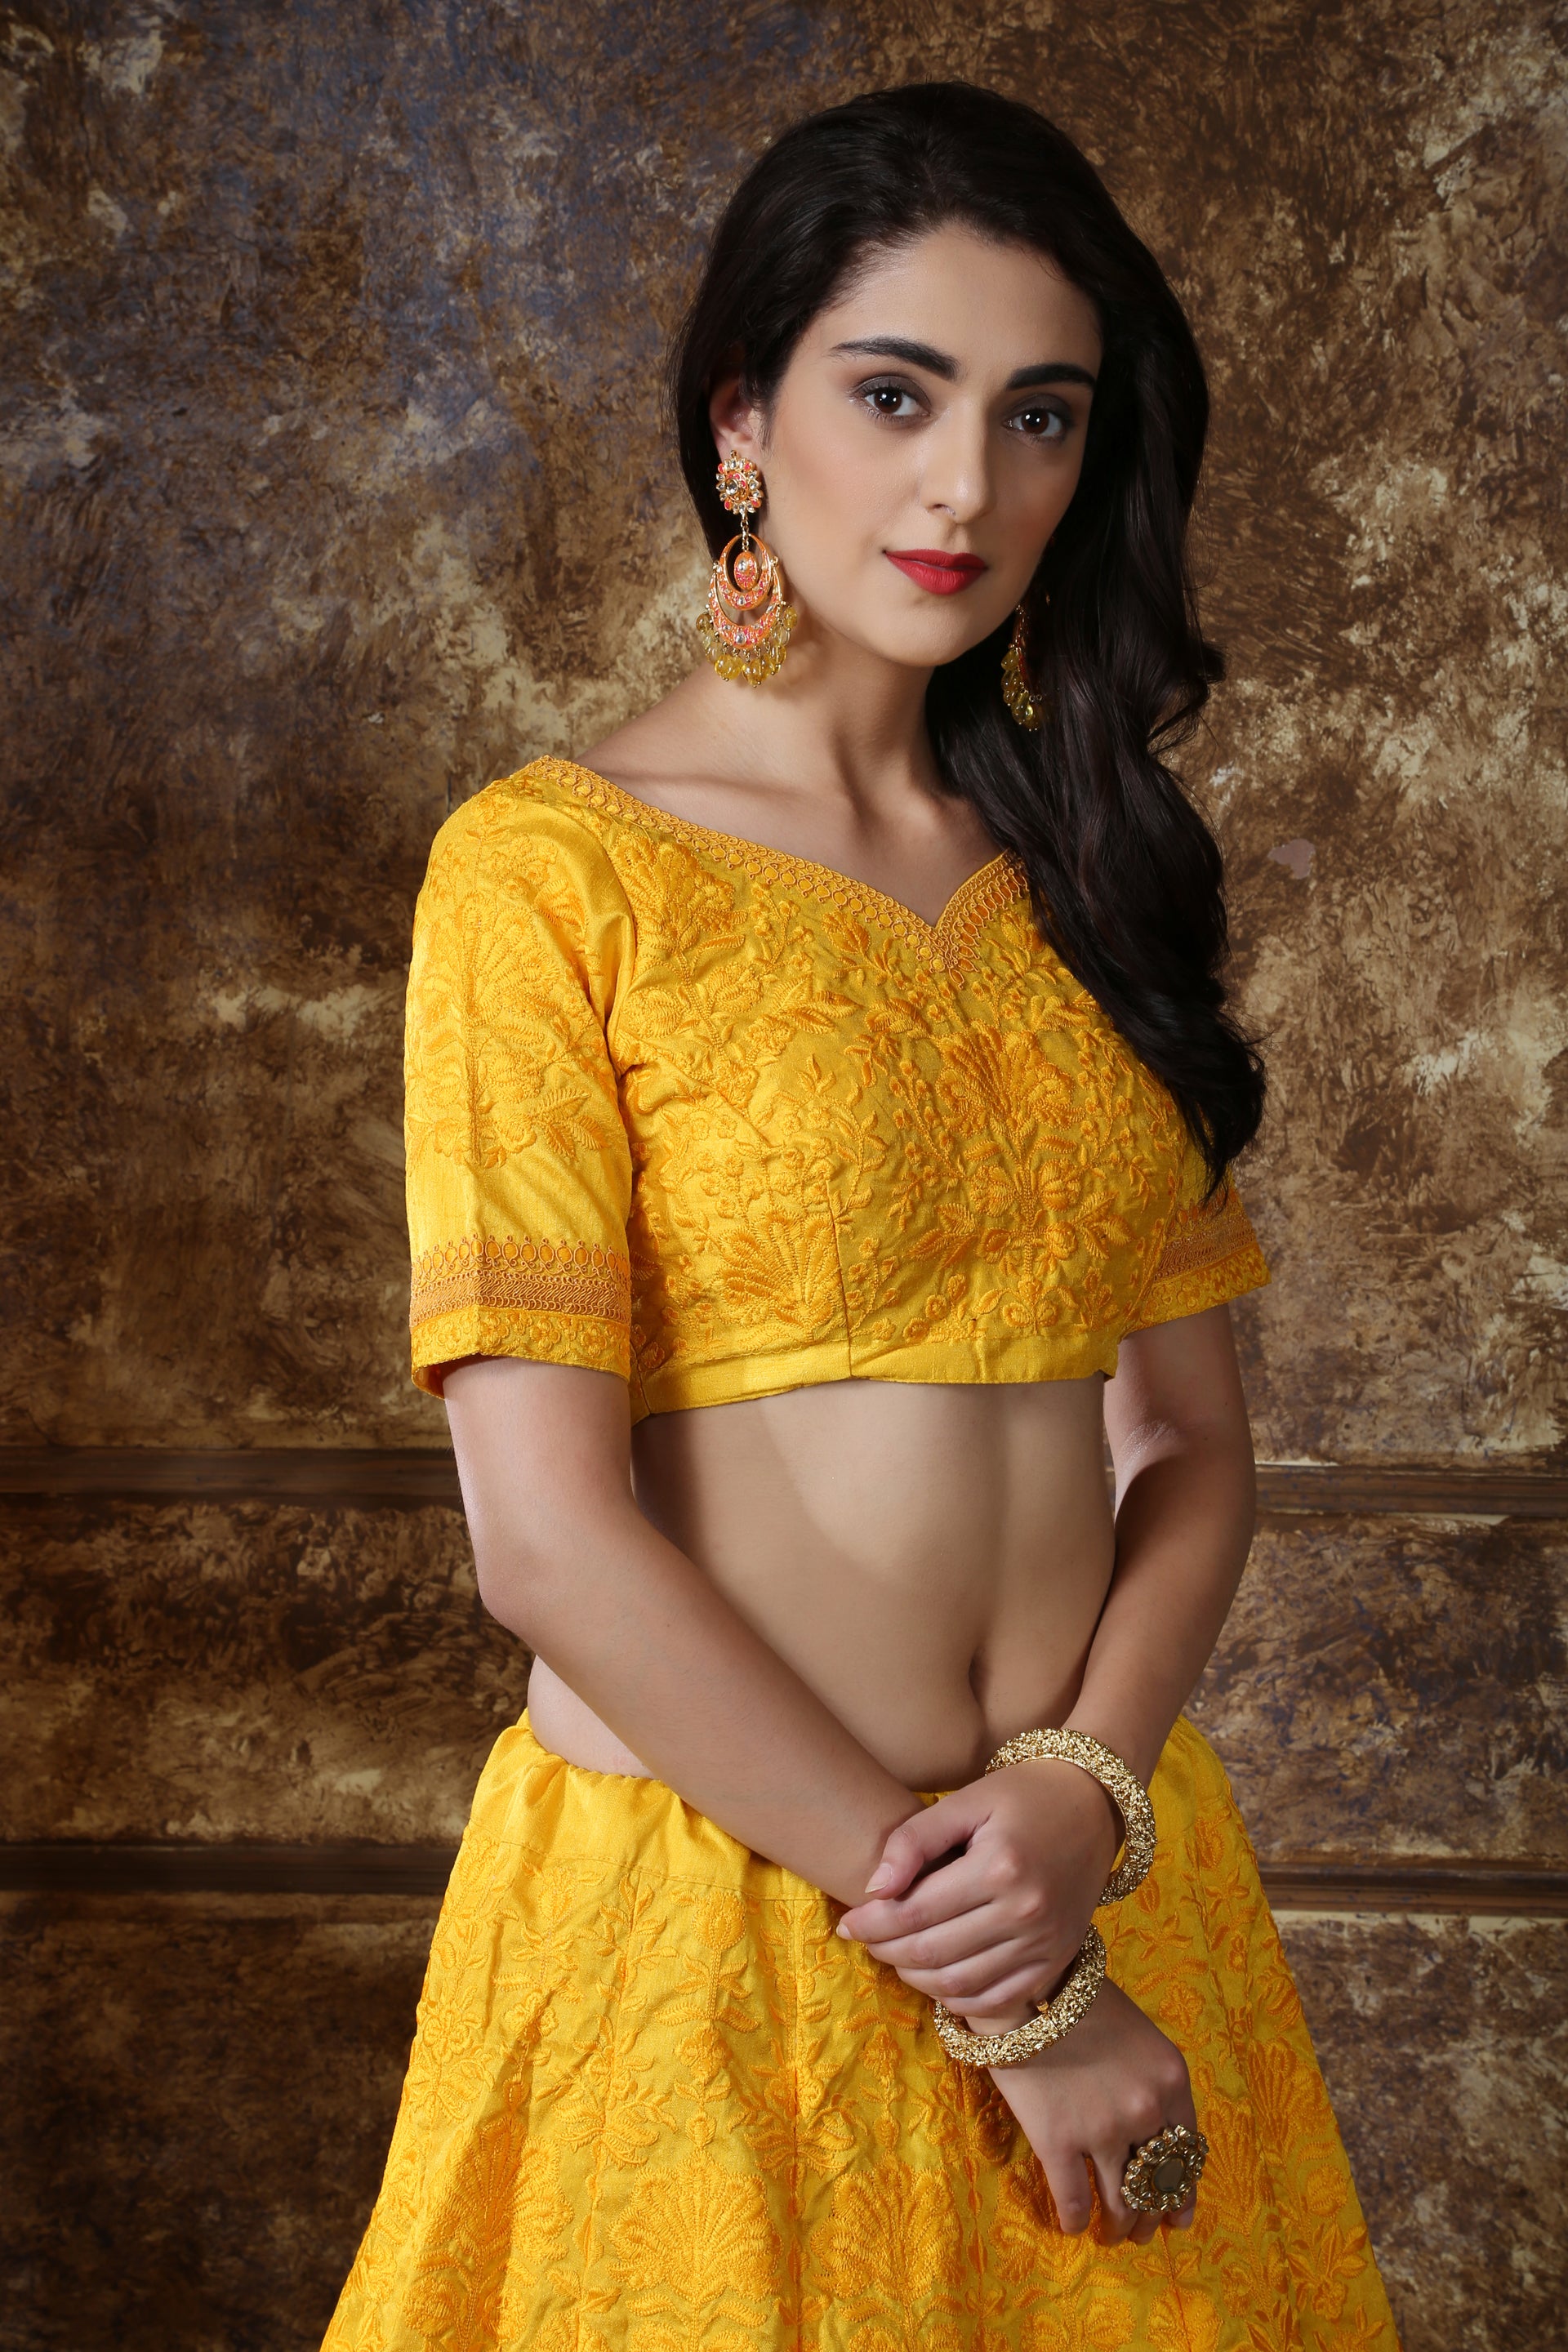 Yellow Lehenga Choli Designs for Haldi Ceremony in Bollywood Style - K4  Fashion | Indian bridal outfits, Haldi outfits, Ceremony dresses